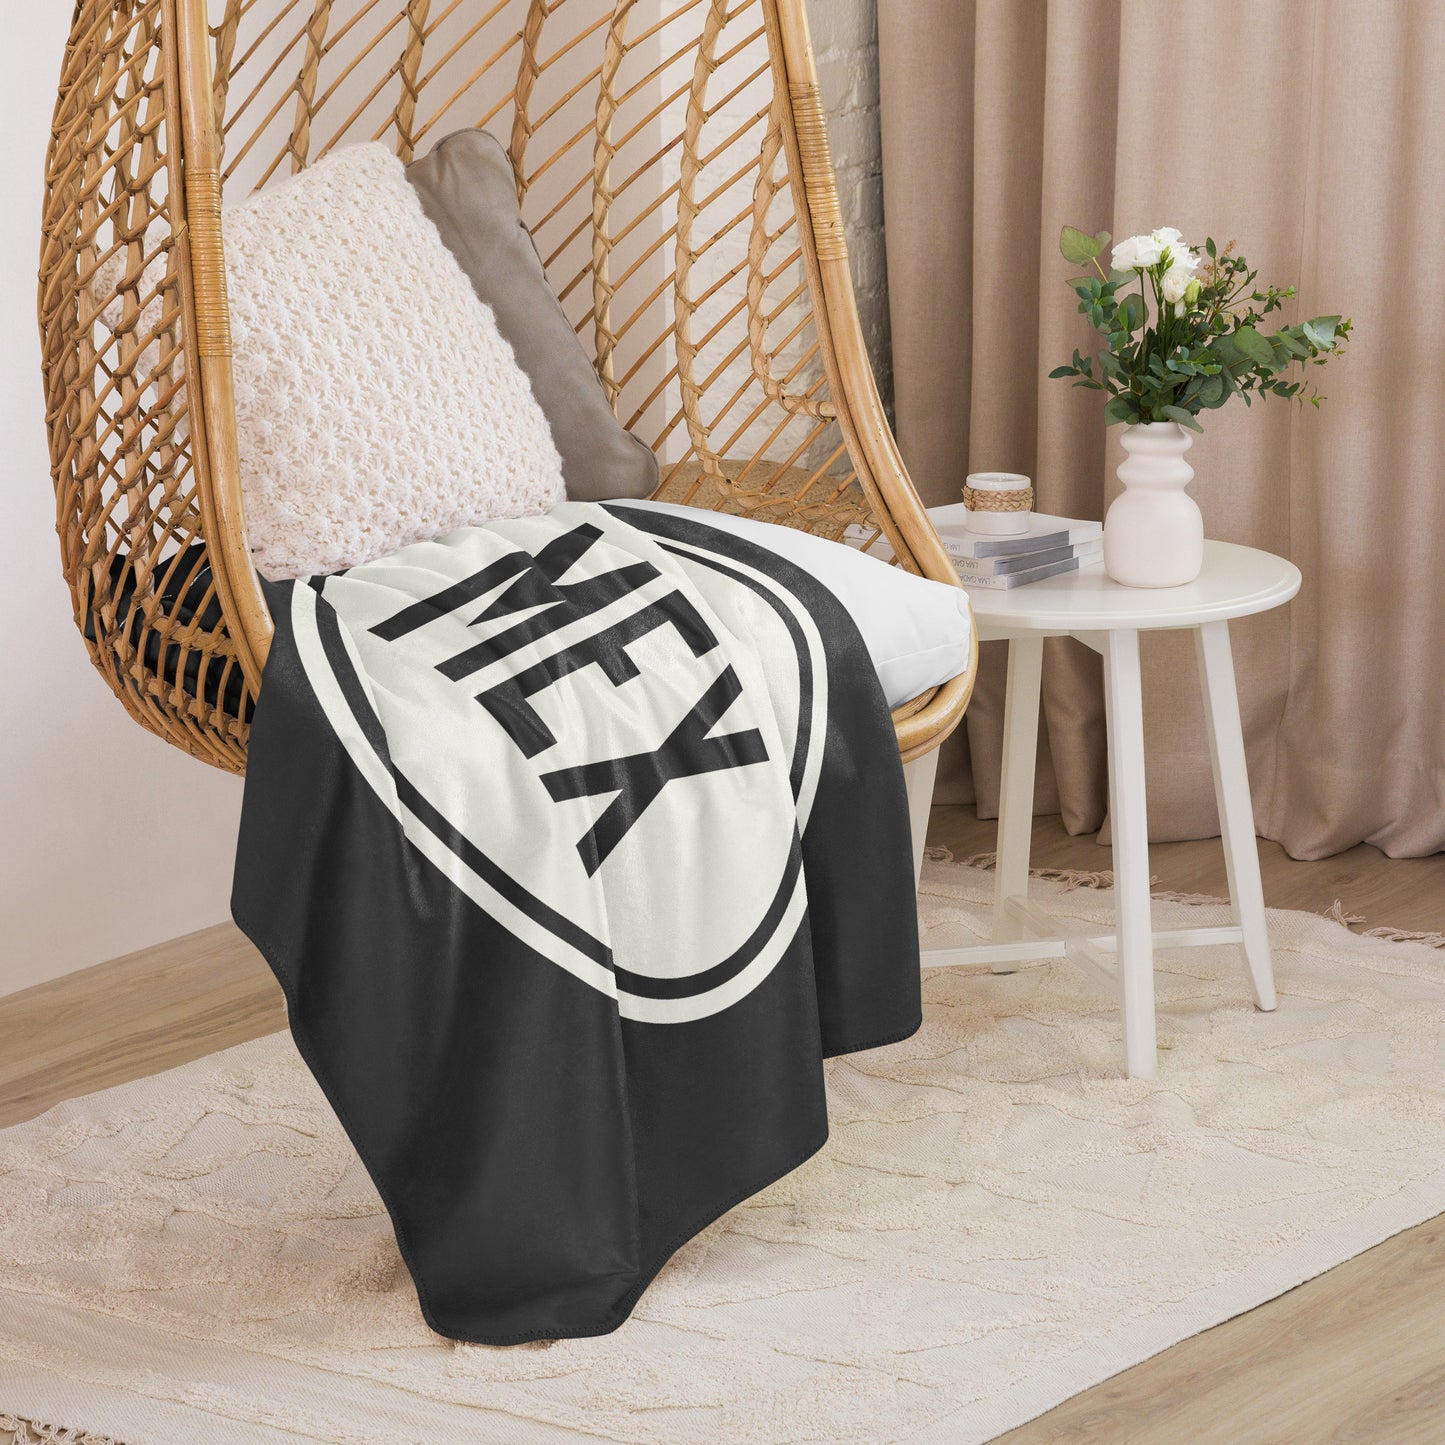 Unique Travel Gift Sherpa Blanket - White Oval • MEX Mexico City • YHM Designs - Image 06